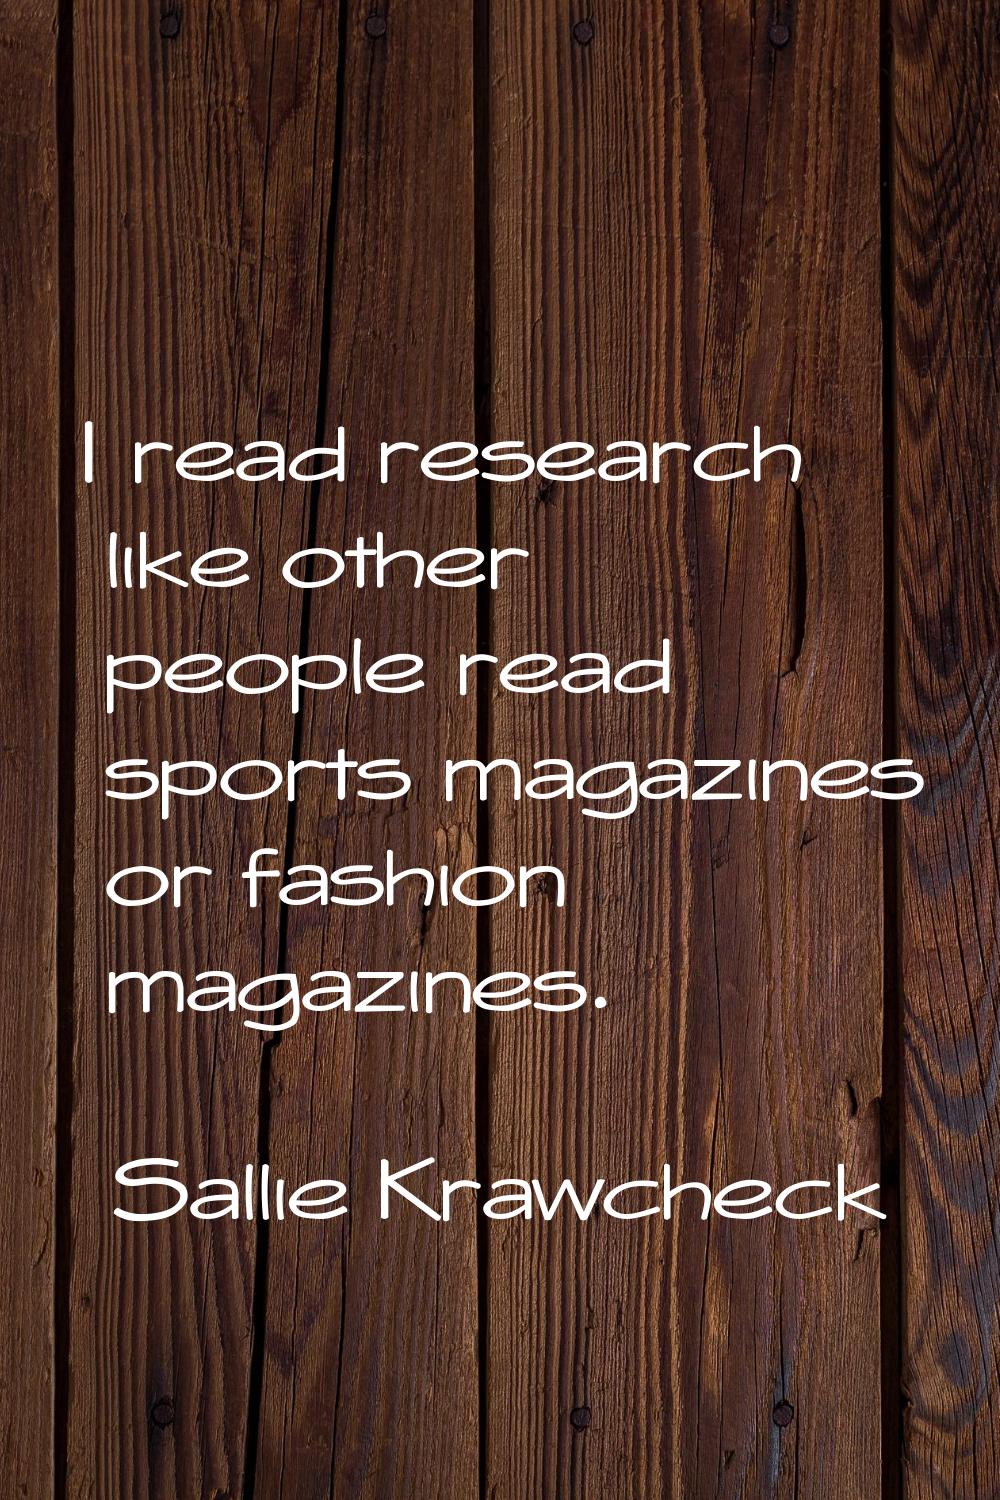 I read research like other people read sports magazines or fashion magazines.